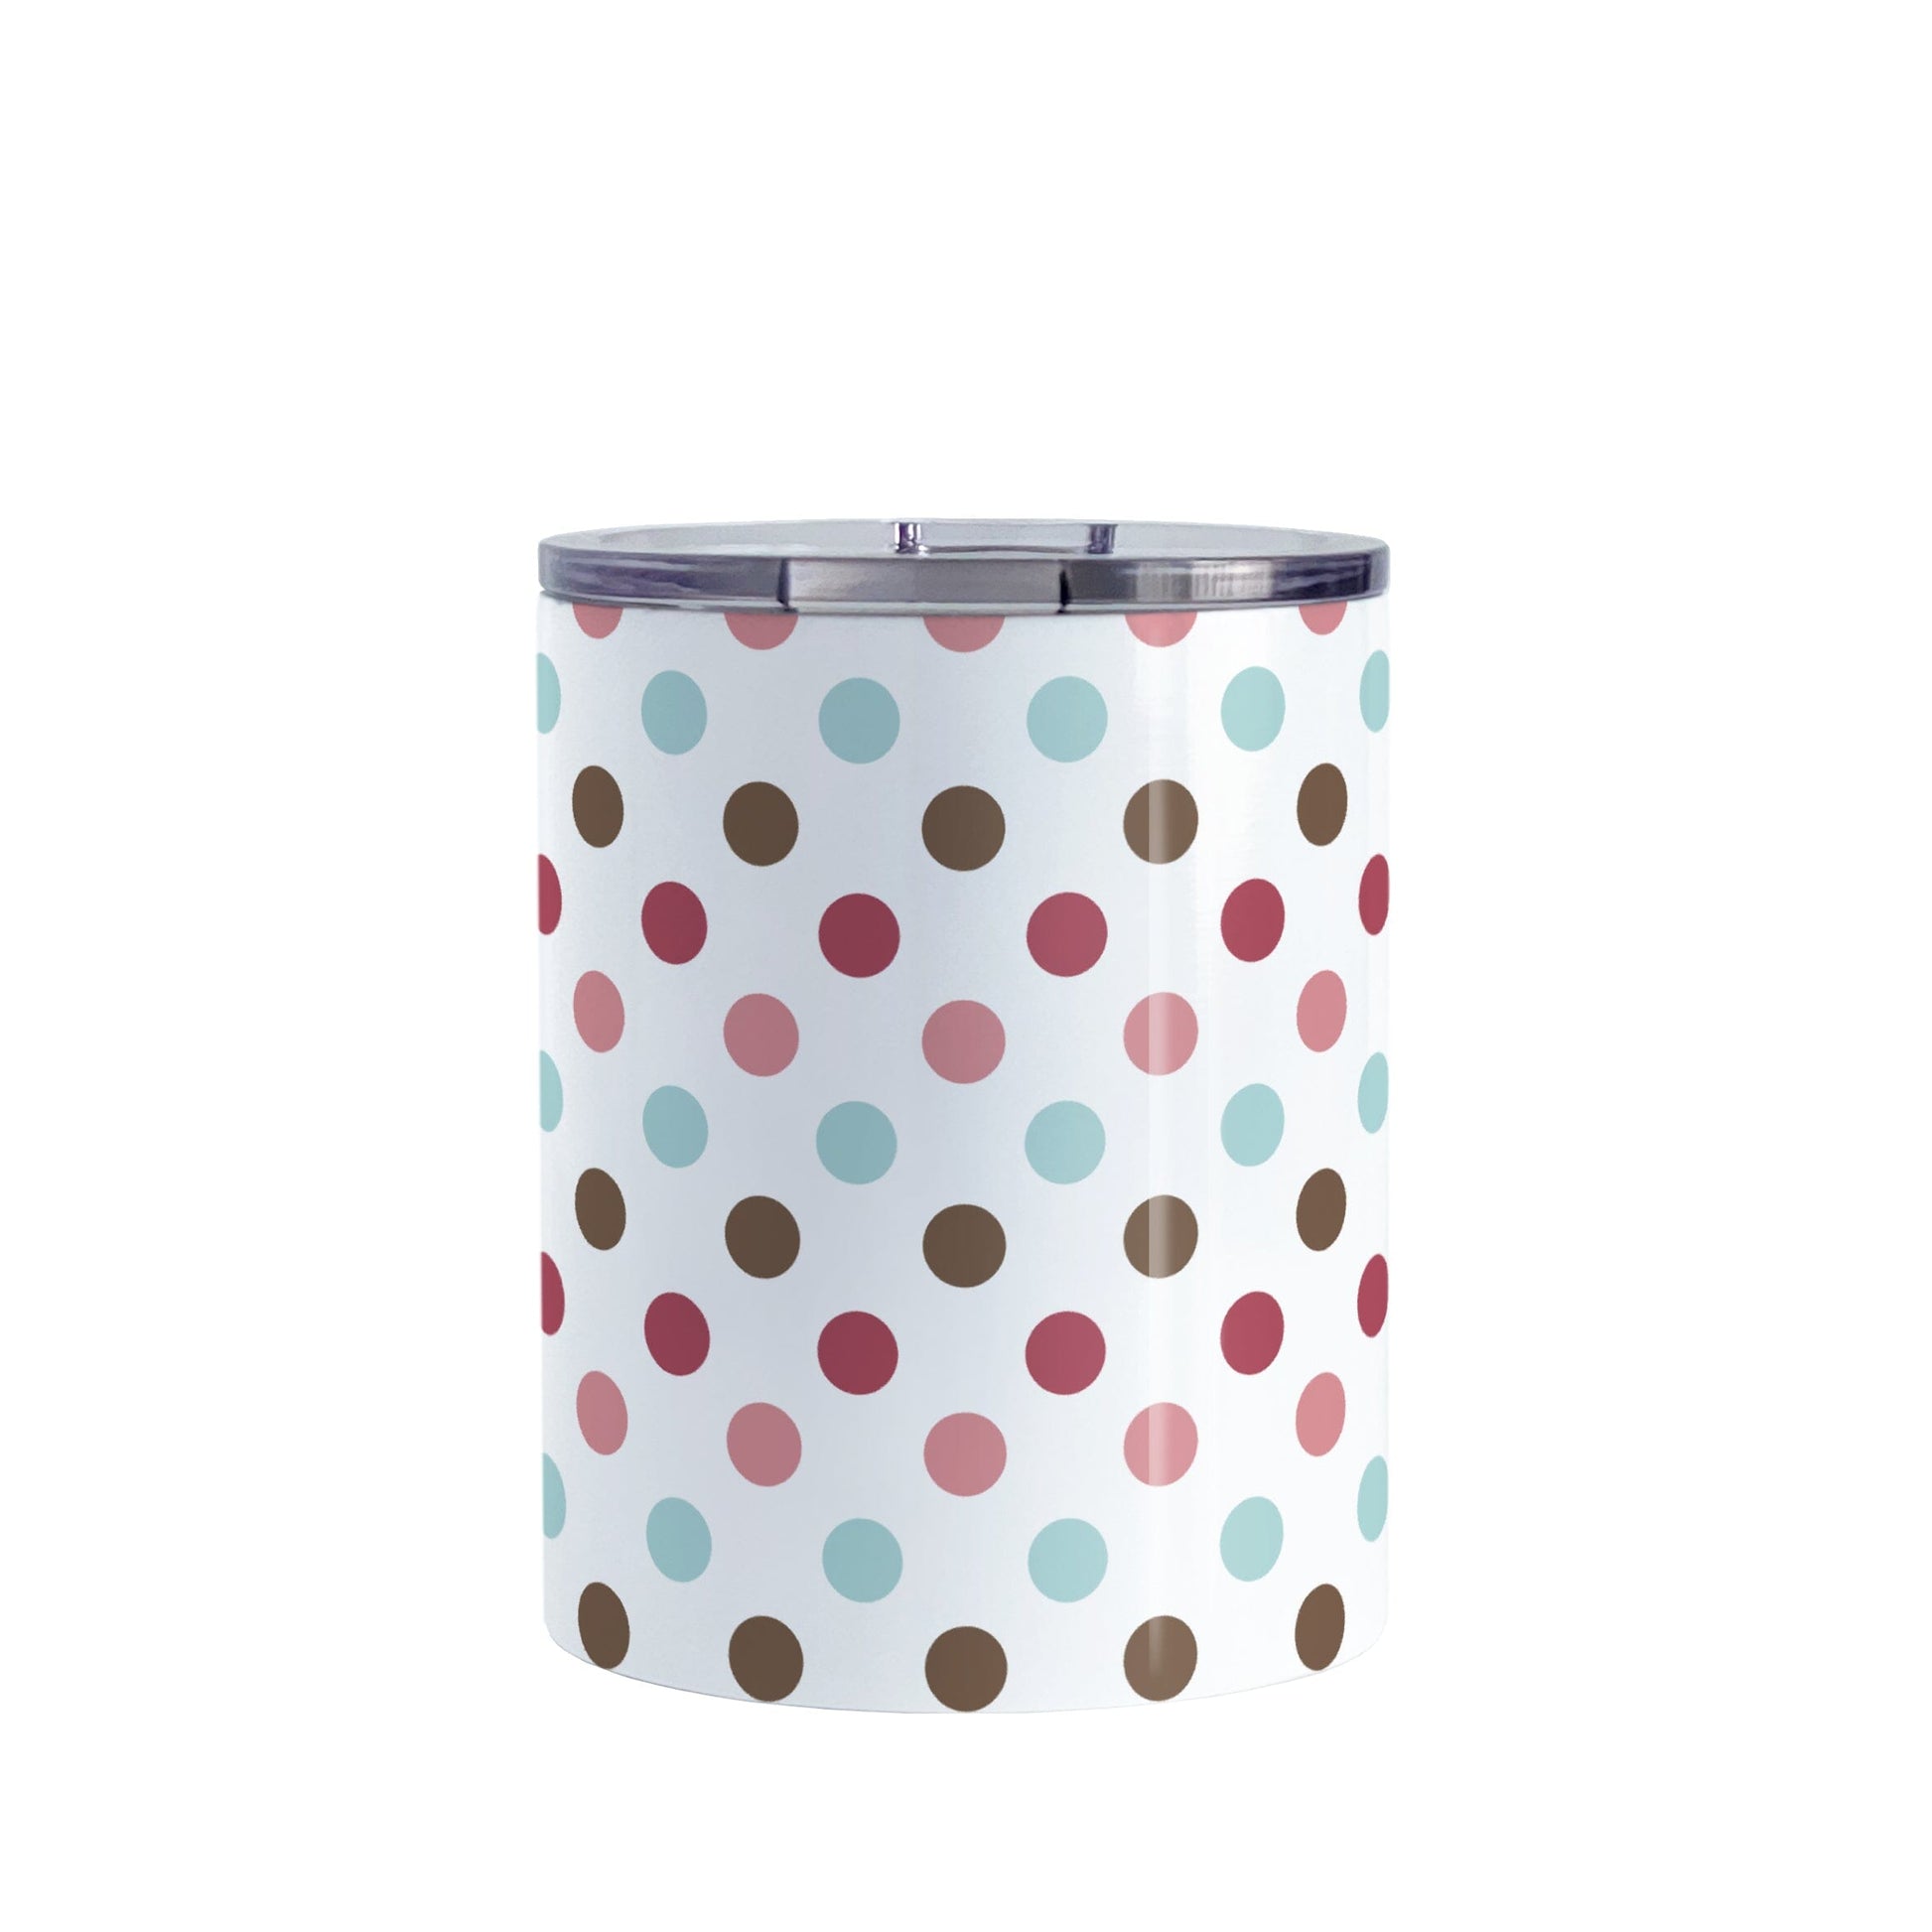 Berry Blue Polka Dots Tumbler Cup (10oz) at Amy's Coffee Mugs. A stainless steel tumbler cup designed with a pattern of polka dots a color palette of berry pink hues, aqua blue, and brown that wraps around the cup.